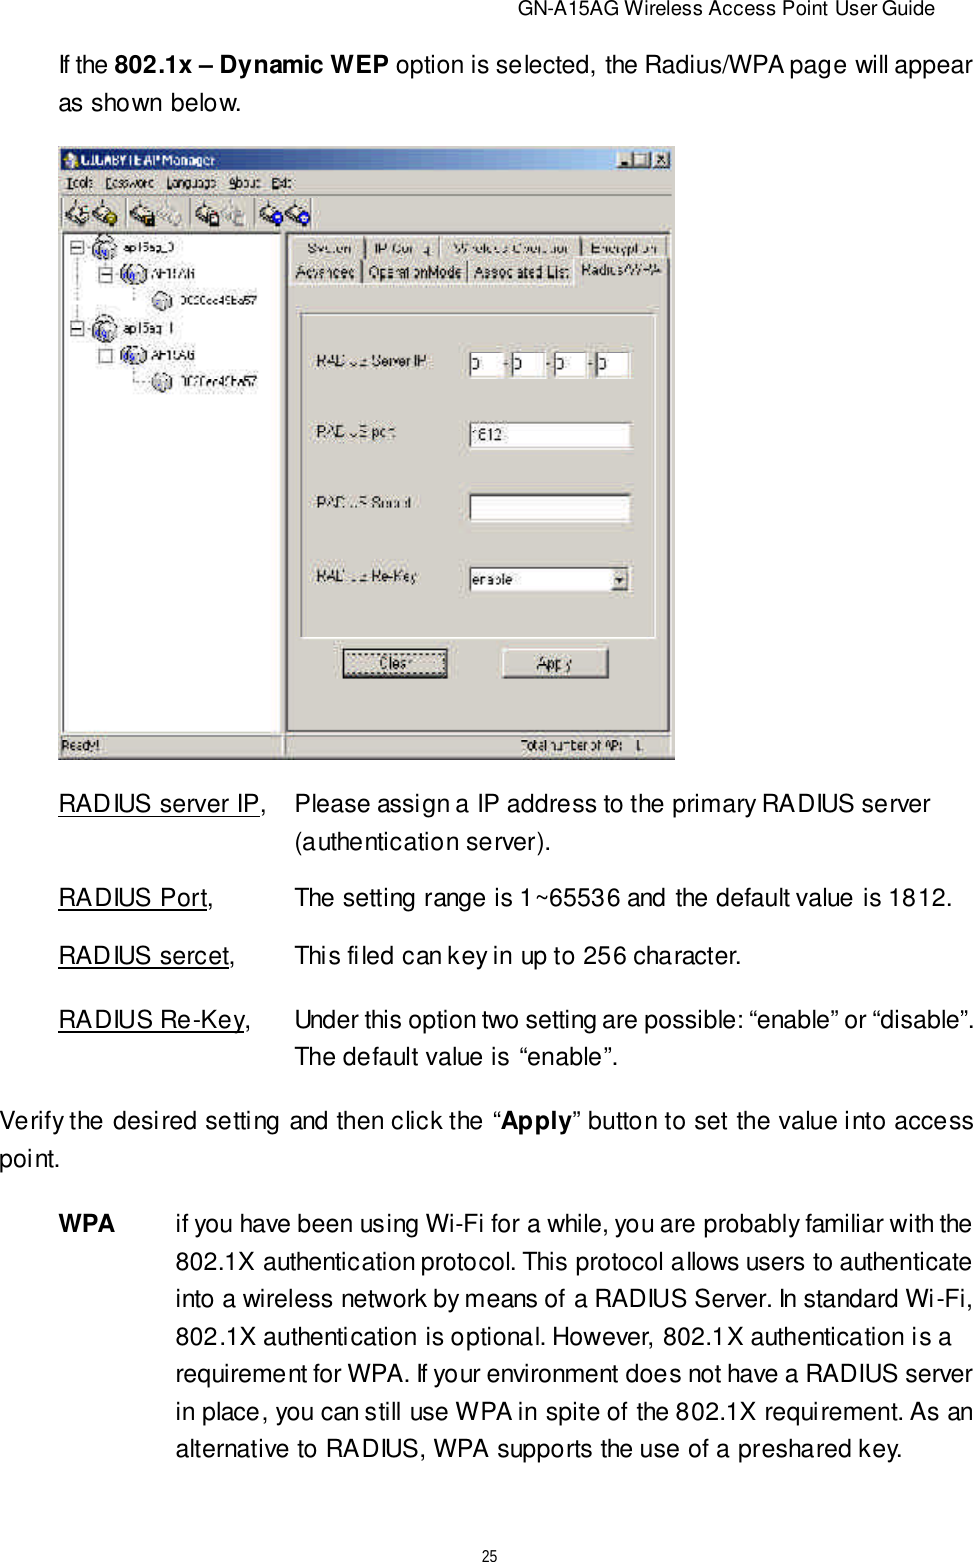                          GN-A15AG Wireless Access Point User Guide25If the 802.1x – Dynamic WEP option is selected, the Radius/WPA page will appearas shown below.RADIUS server IP,Please assign a IP address to the primary RADIUS server(authentication server).RADIUS Port, The setting range is 1~65536 and the default value is 1812.RADIUS sercet, This filed can key in up to 256 character.RADIUS Re-Key,Under this option two setting are possible: “enable” or “disable”.The default value is “enable”.Verify the desired setting and then click the “Apply” button to set the value into accesspoint.WPAif you have been using Wi-Fi for a while, you are probably familiar with the802.1X authentication protocol. This protocol allows users to authenticateinto a wireless network by means of a RADIUS Server. In standard Wi-Fi,802.1X authentication is optional. However, 802.1X authentication is arequirement for WPA. If your environment does not have a RADIUS serverin place, you can still use WPA in spite of the 802.1X requirement. As analternative to RADIUS, WPA supports the use of a preshared key.